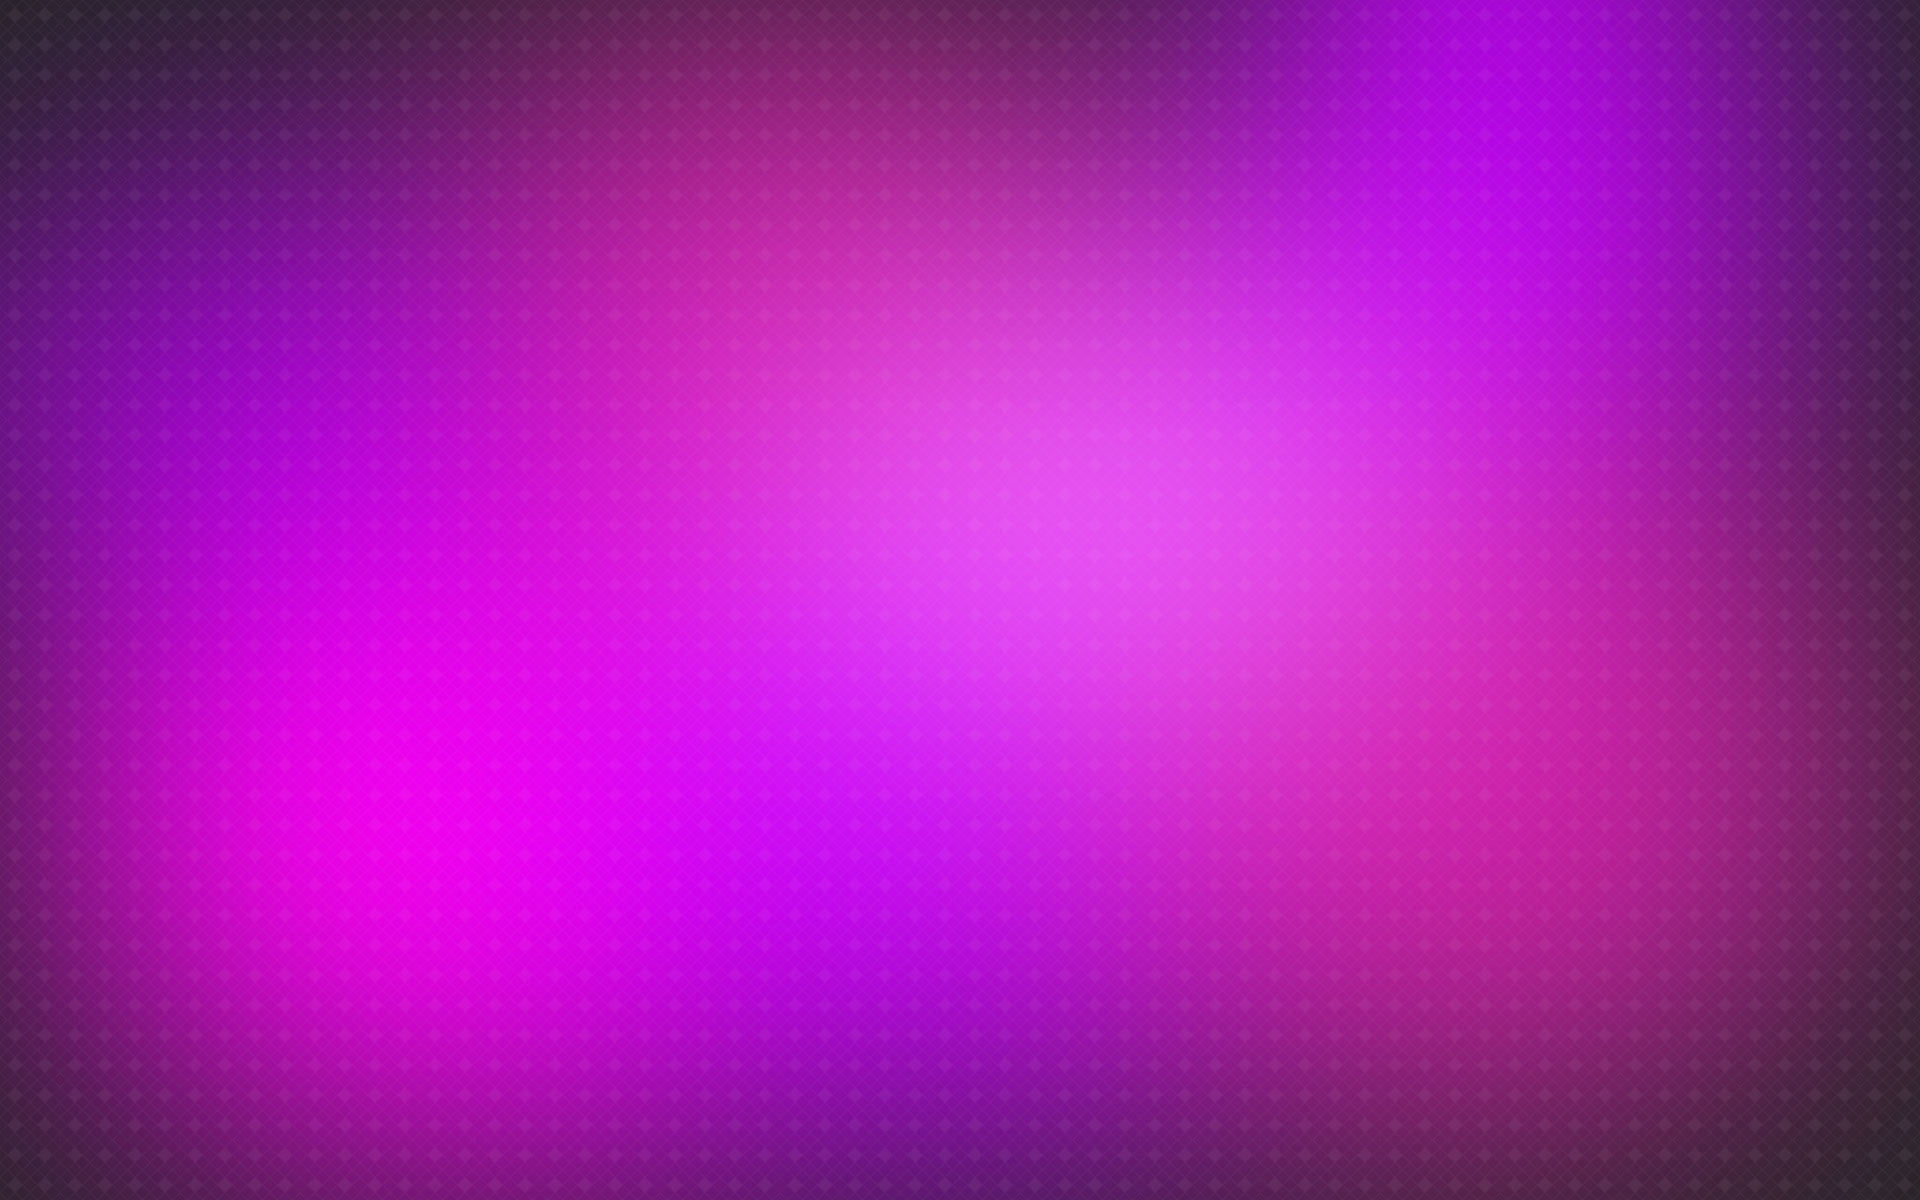 lilac, purple, bright, spots, backgrounds, abstract, pattern